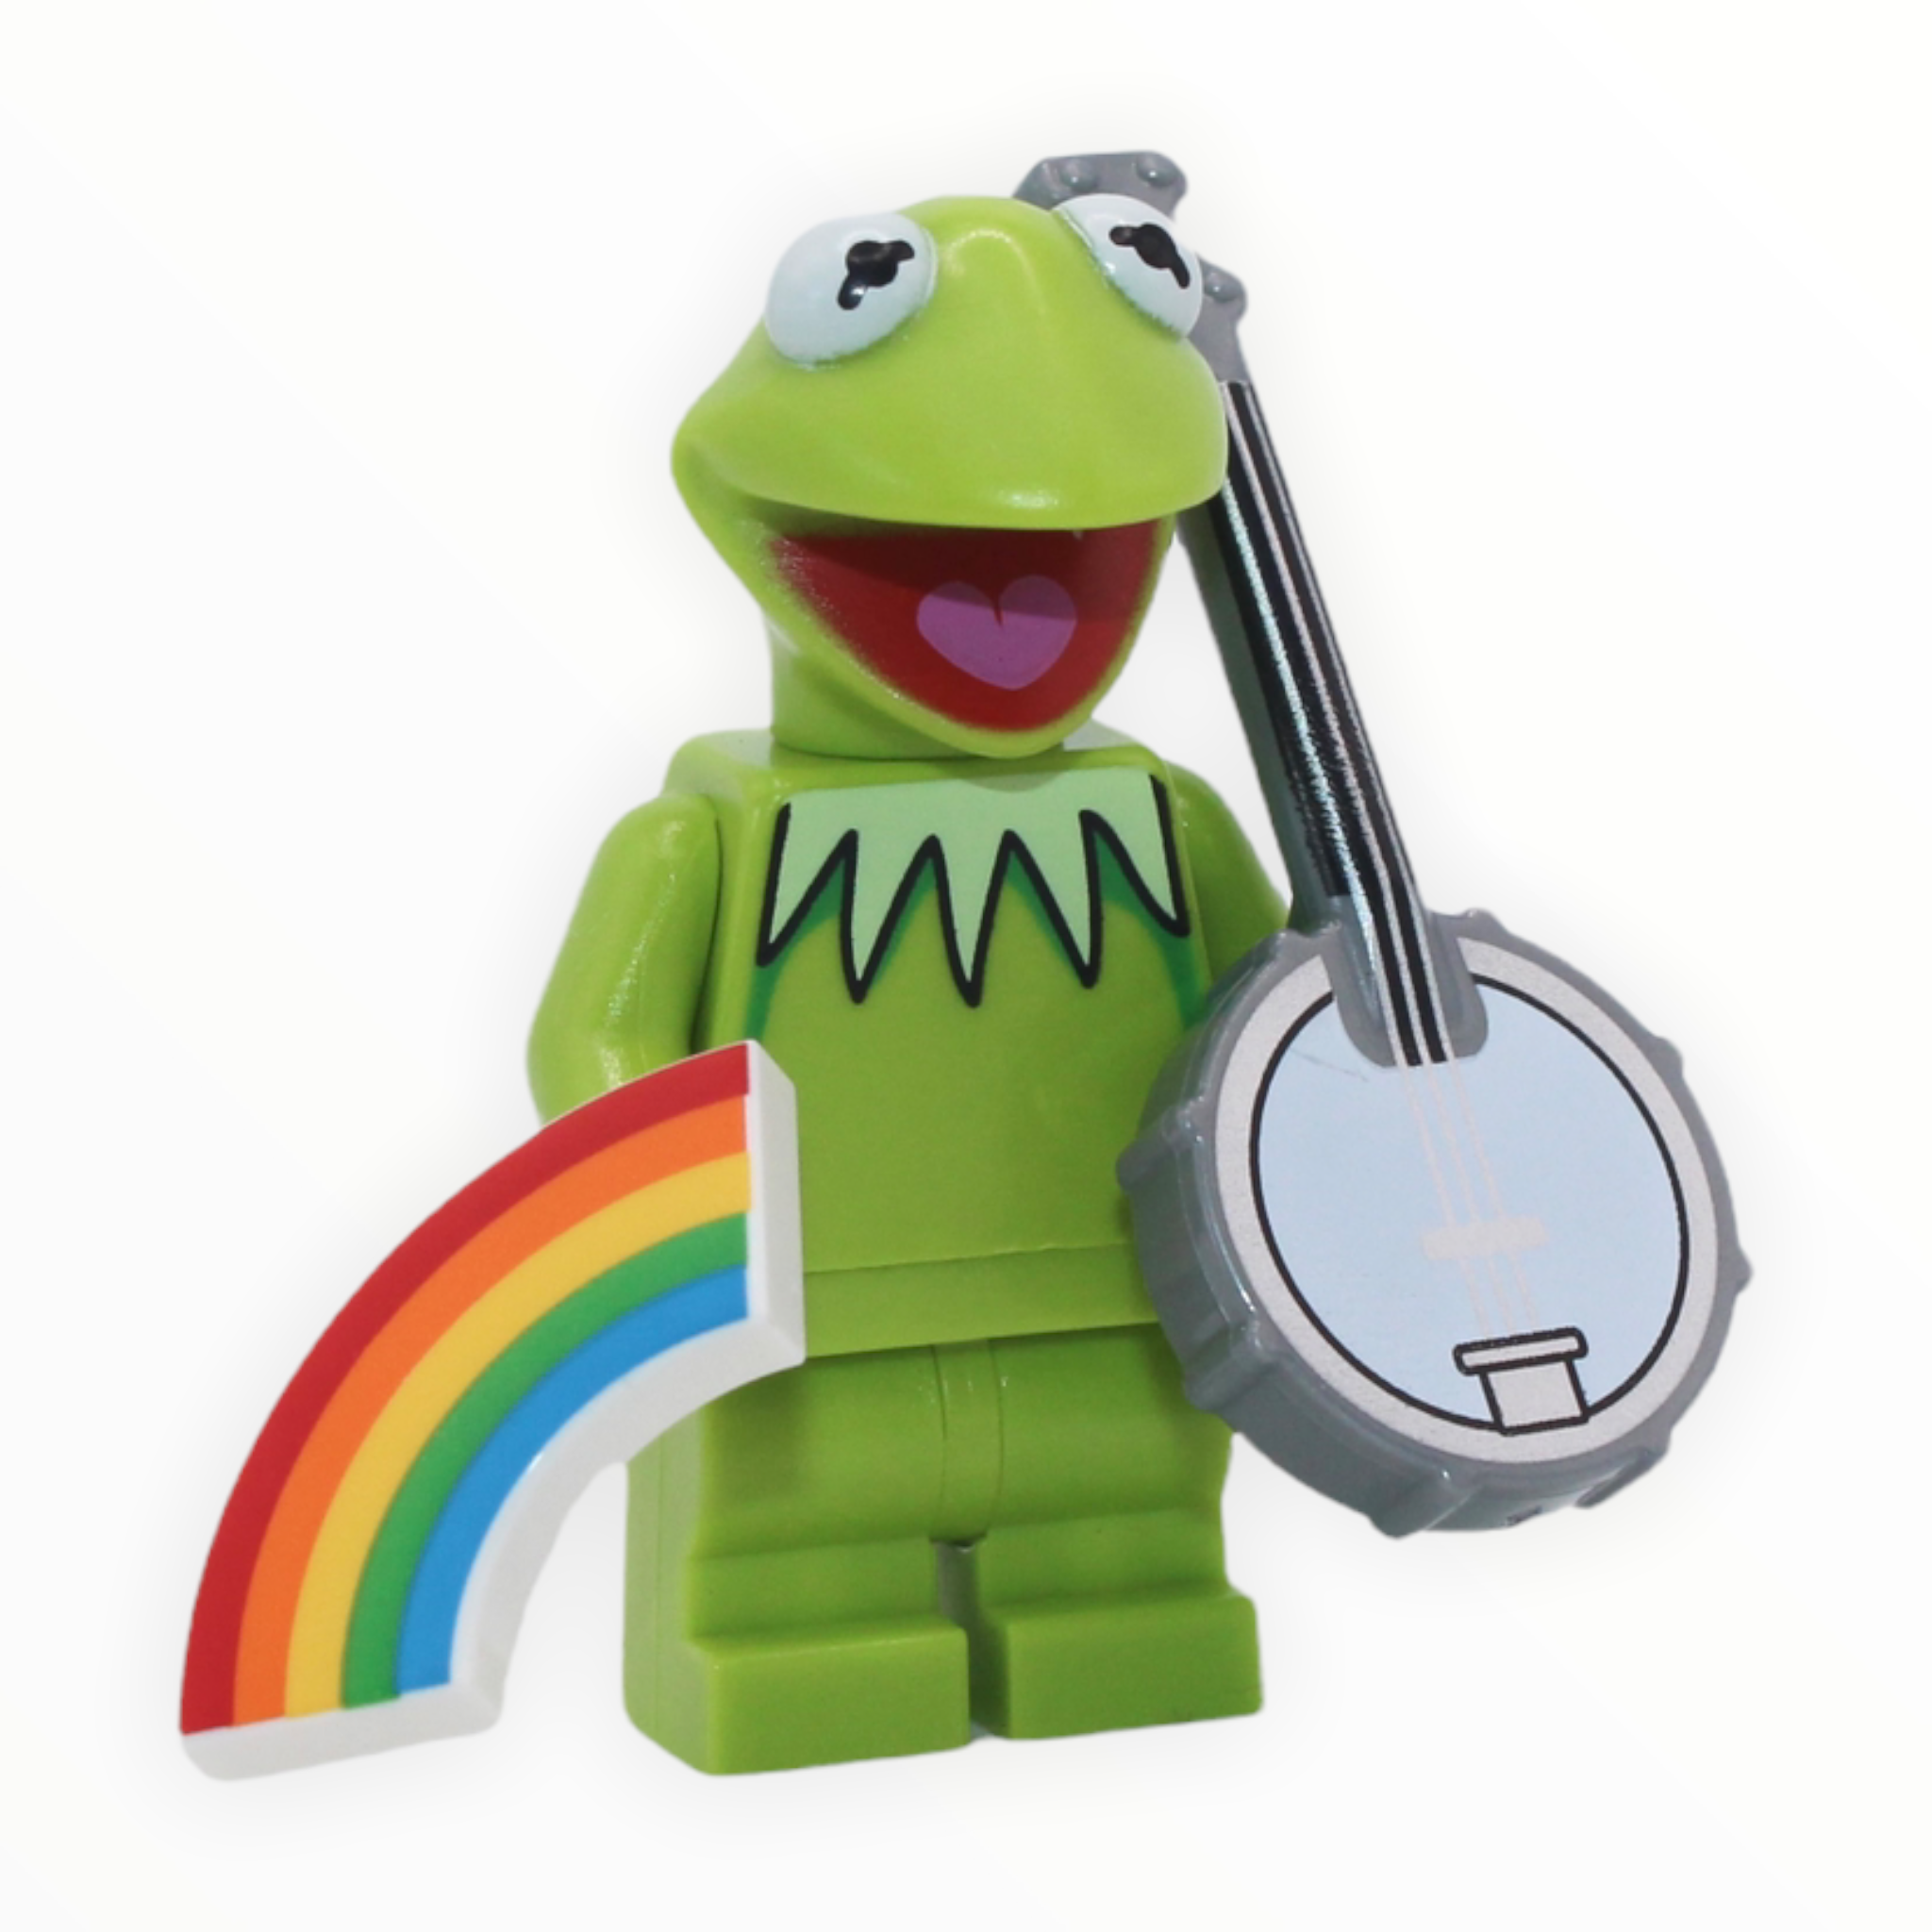 The Muppets Series: Kermit the Frog